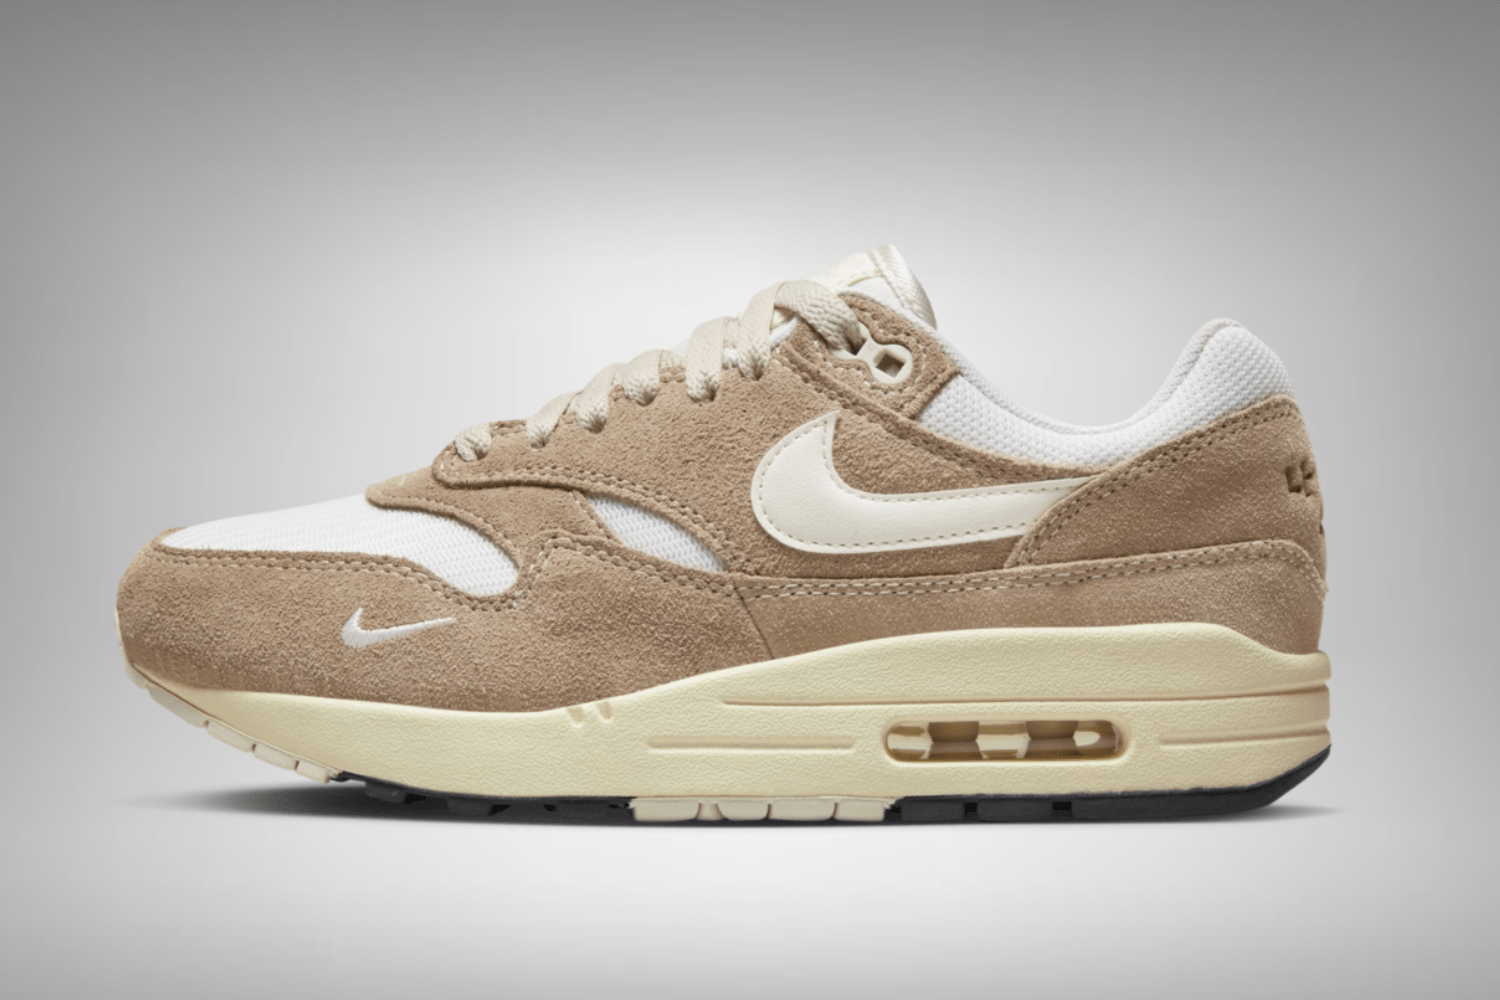 Check out the official images of the Nike Air Max 1 'Hangul Day'